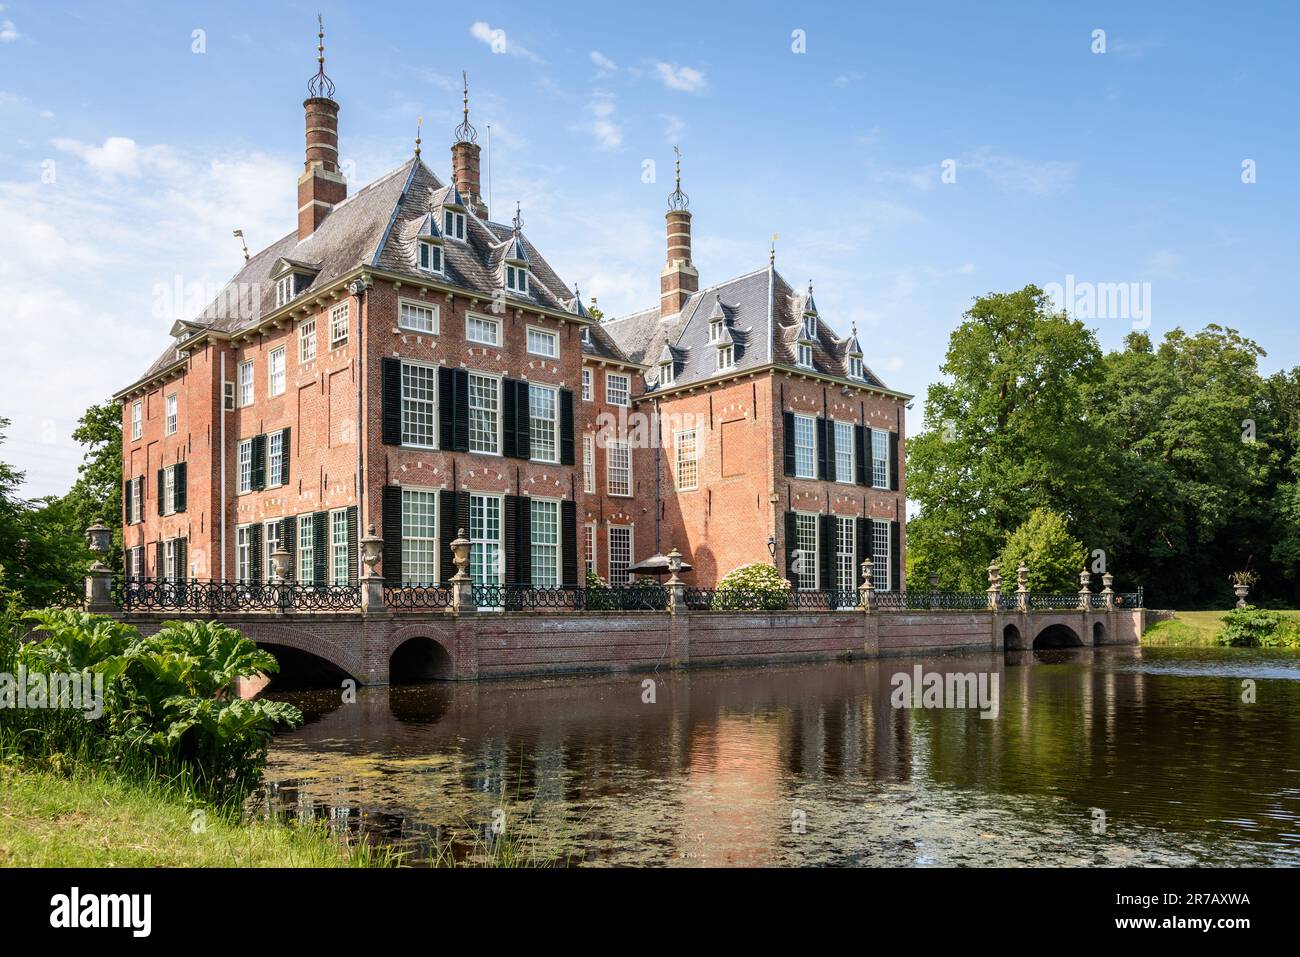 Historic castle in the countryside of Netherlands on a clear summer day Stock Photo